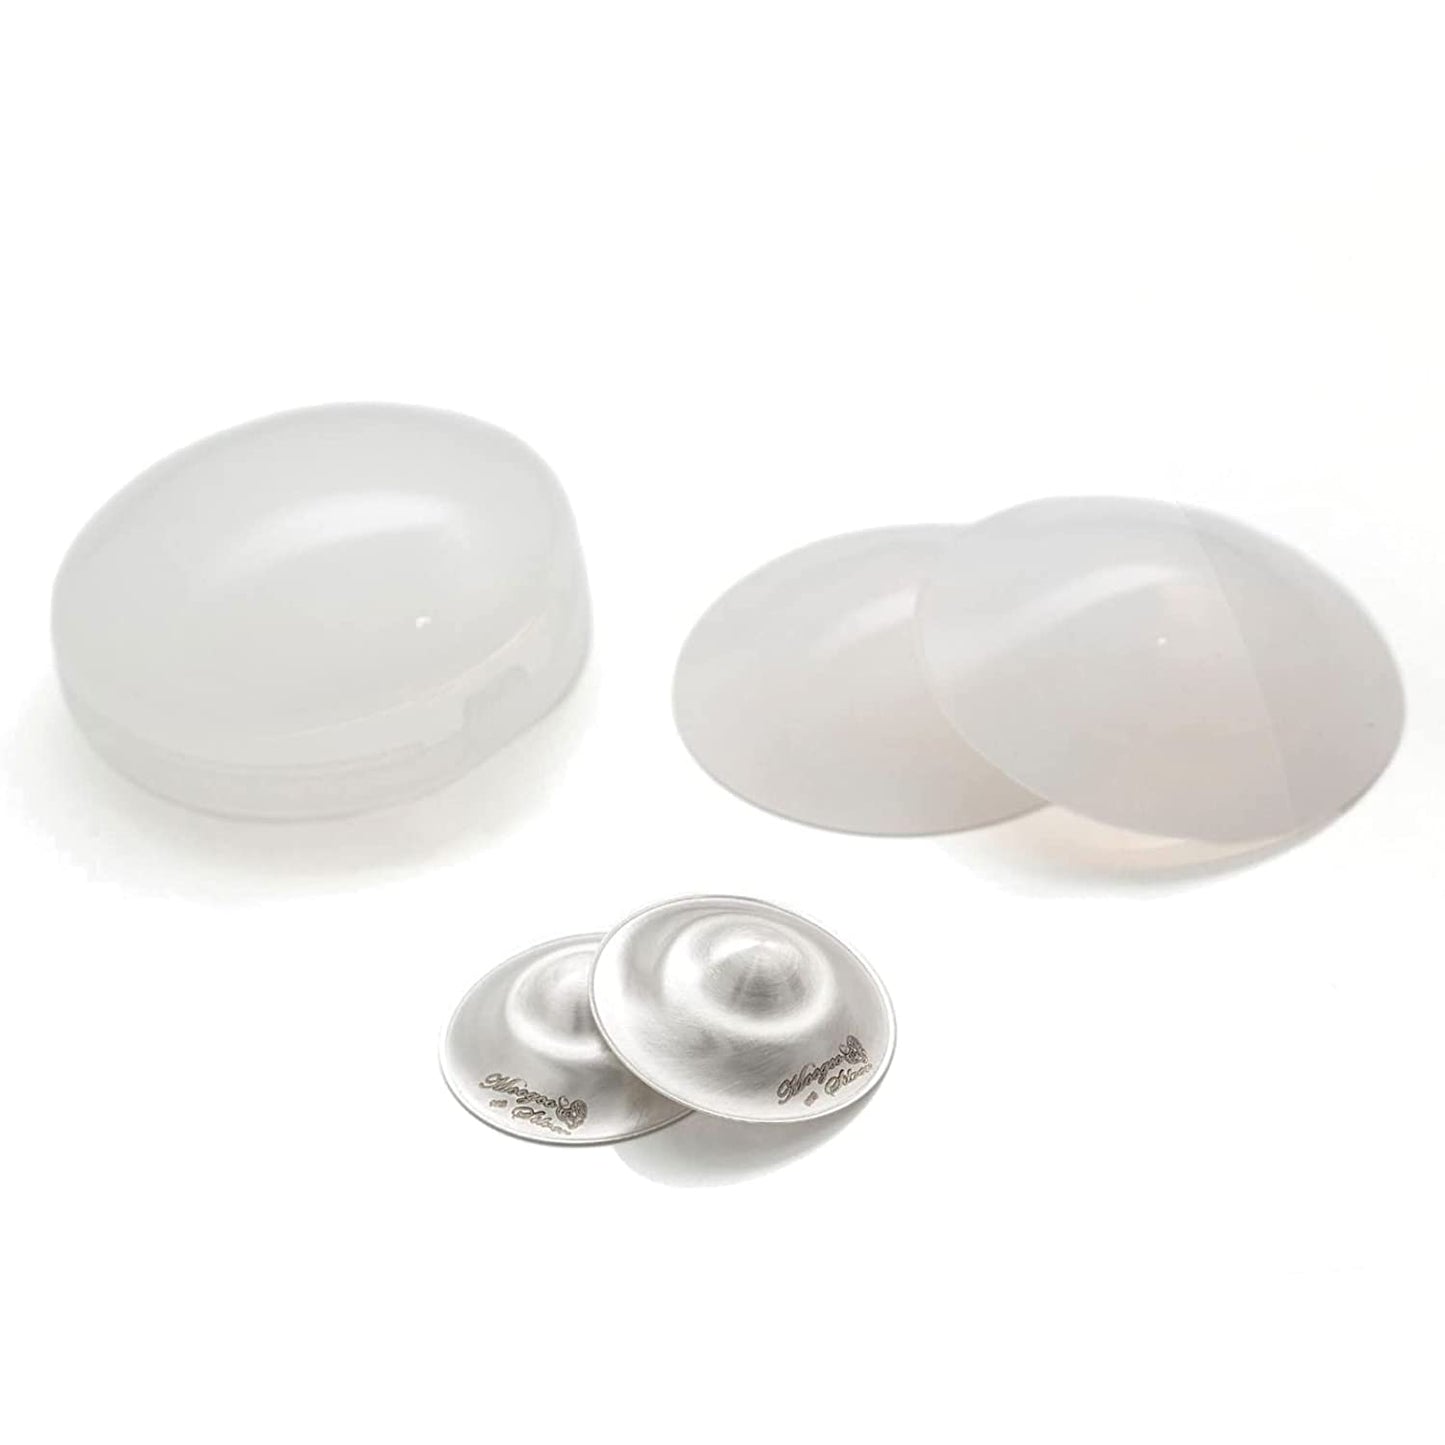 The Original Silver Nursing Cups with Silicone Pads - Experience the Difference